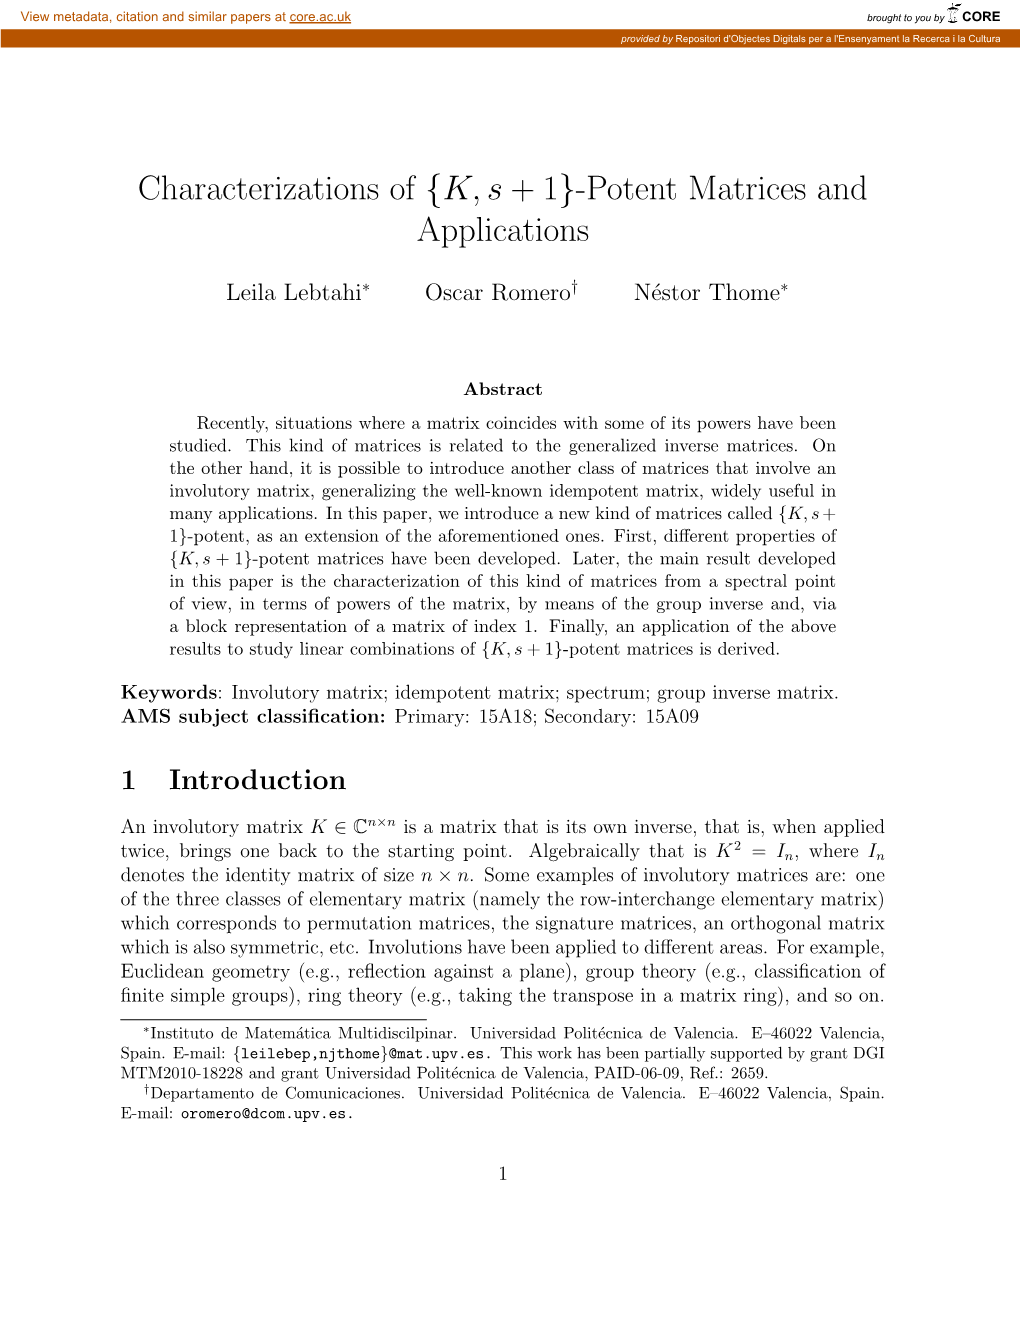 Characterizations of {K, S + 1}-Potent Matrices and Applications